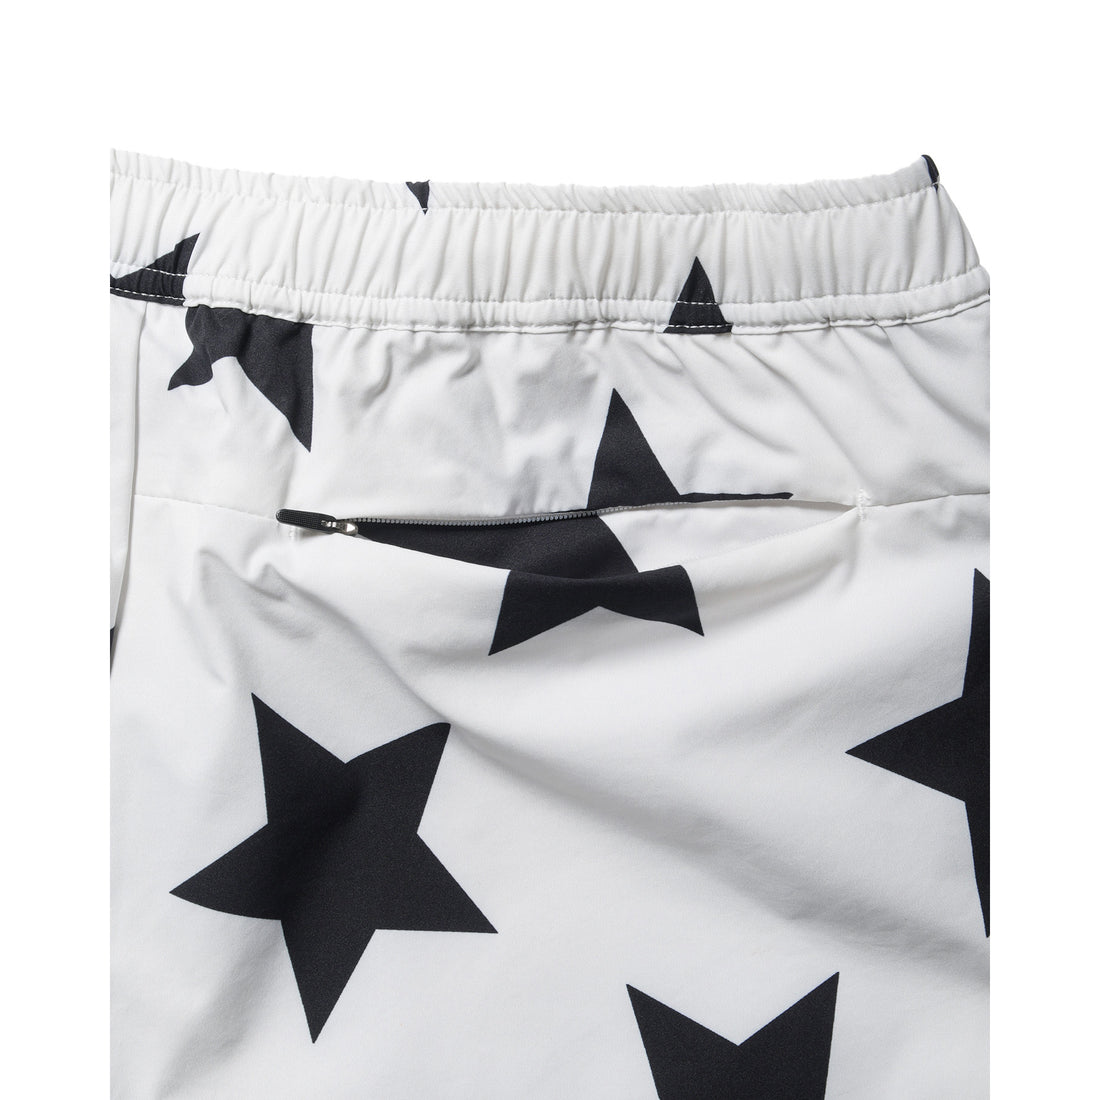 [F.C.Real Bristol]PRACTICE SHORTS(FCRB-230028)